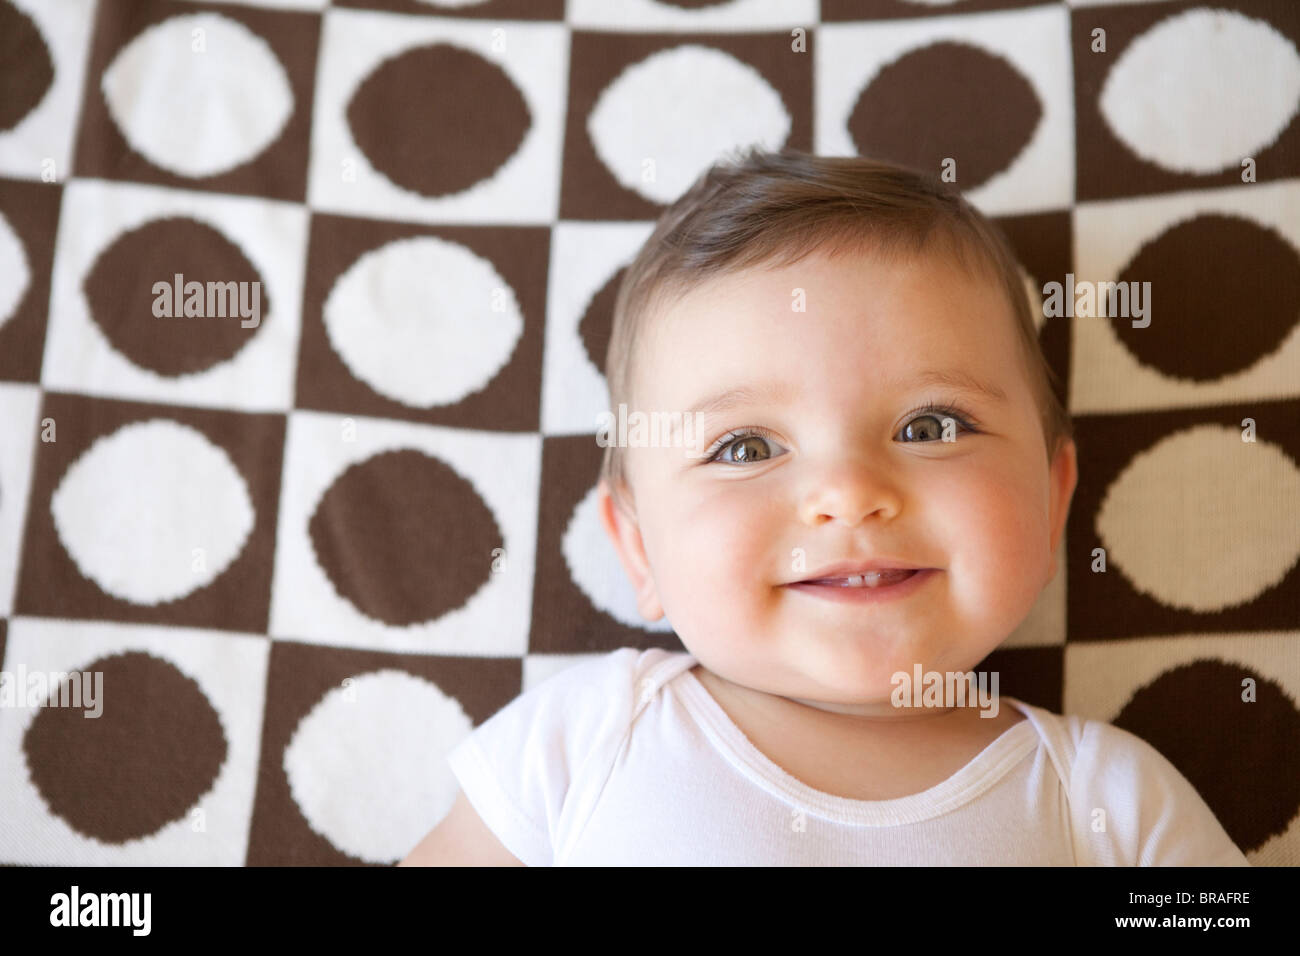 Smiling baby on brown and white blanket Stock Photo